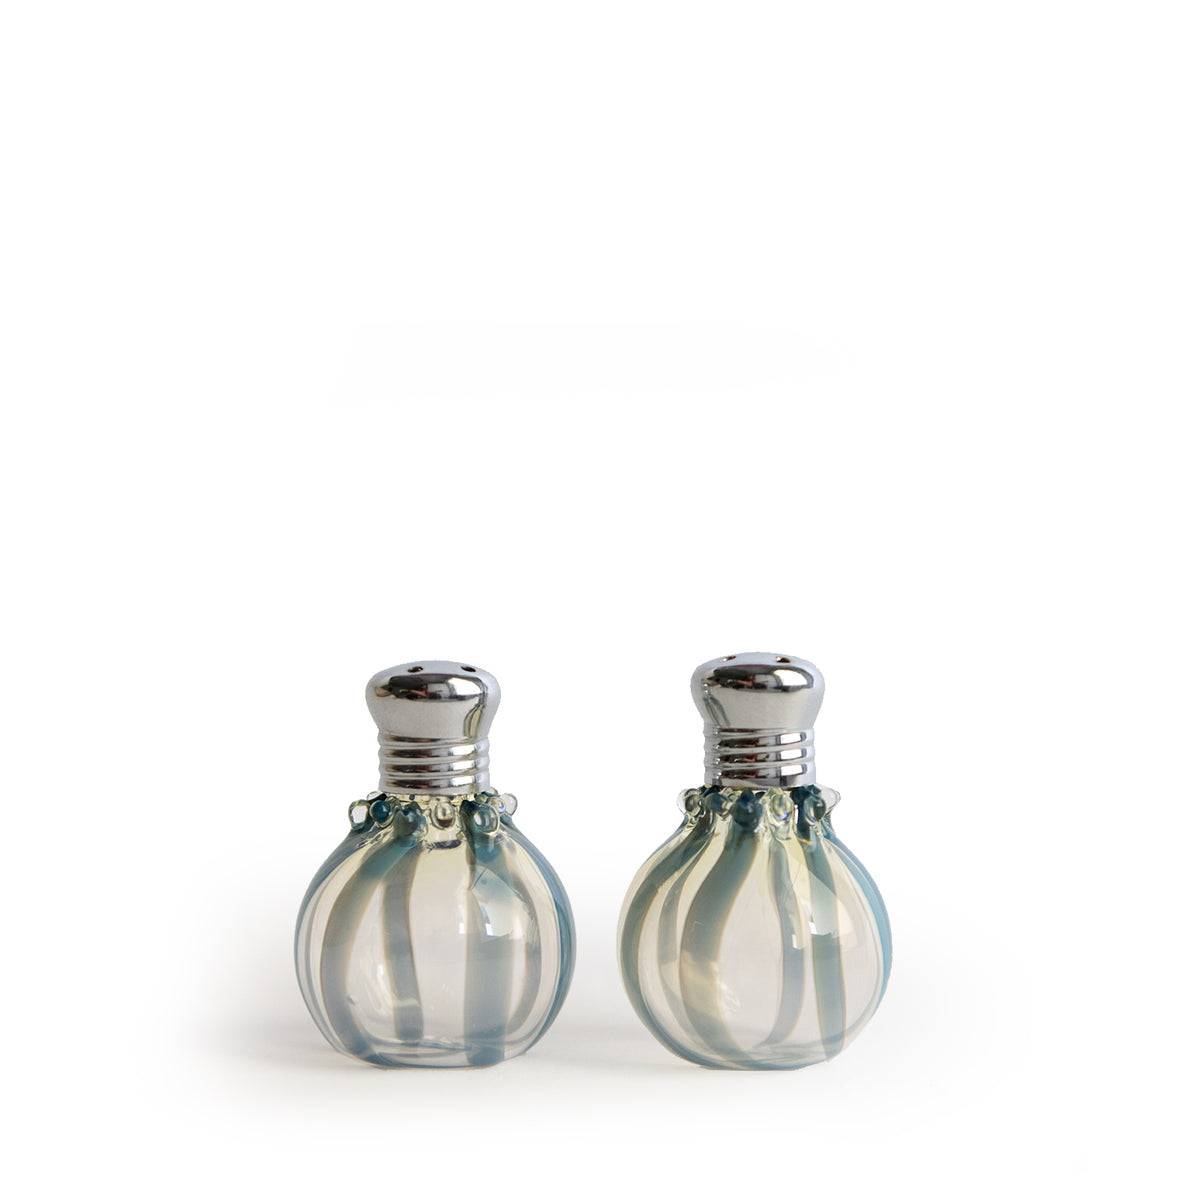 Individual Salt and Pepper Shaker Set, Turquoise– Blue Print